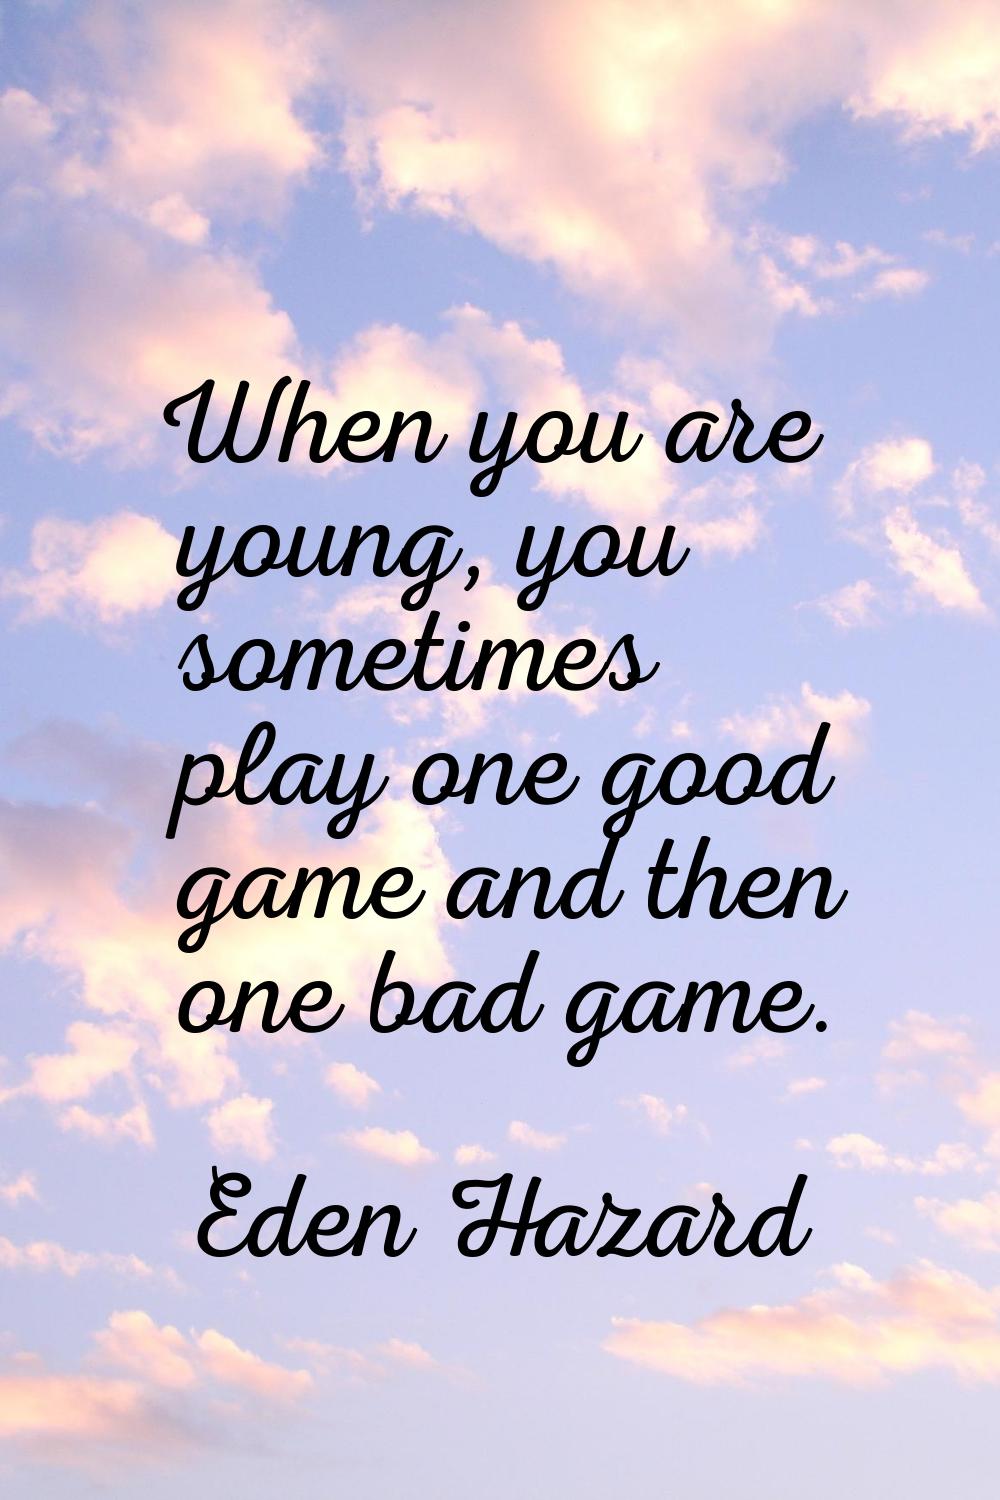 When you are young, you sometimes play one good game and then one bad game.